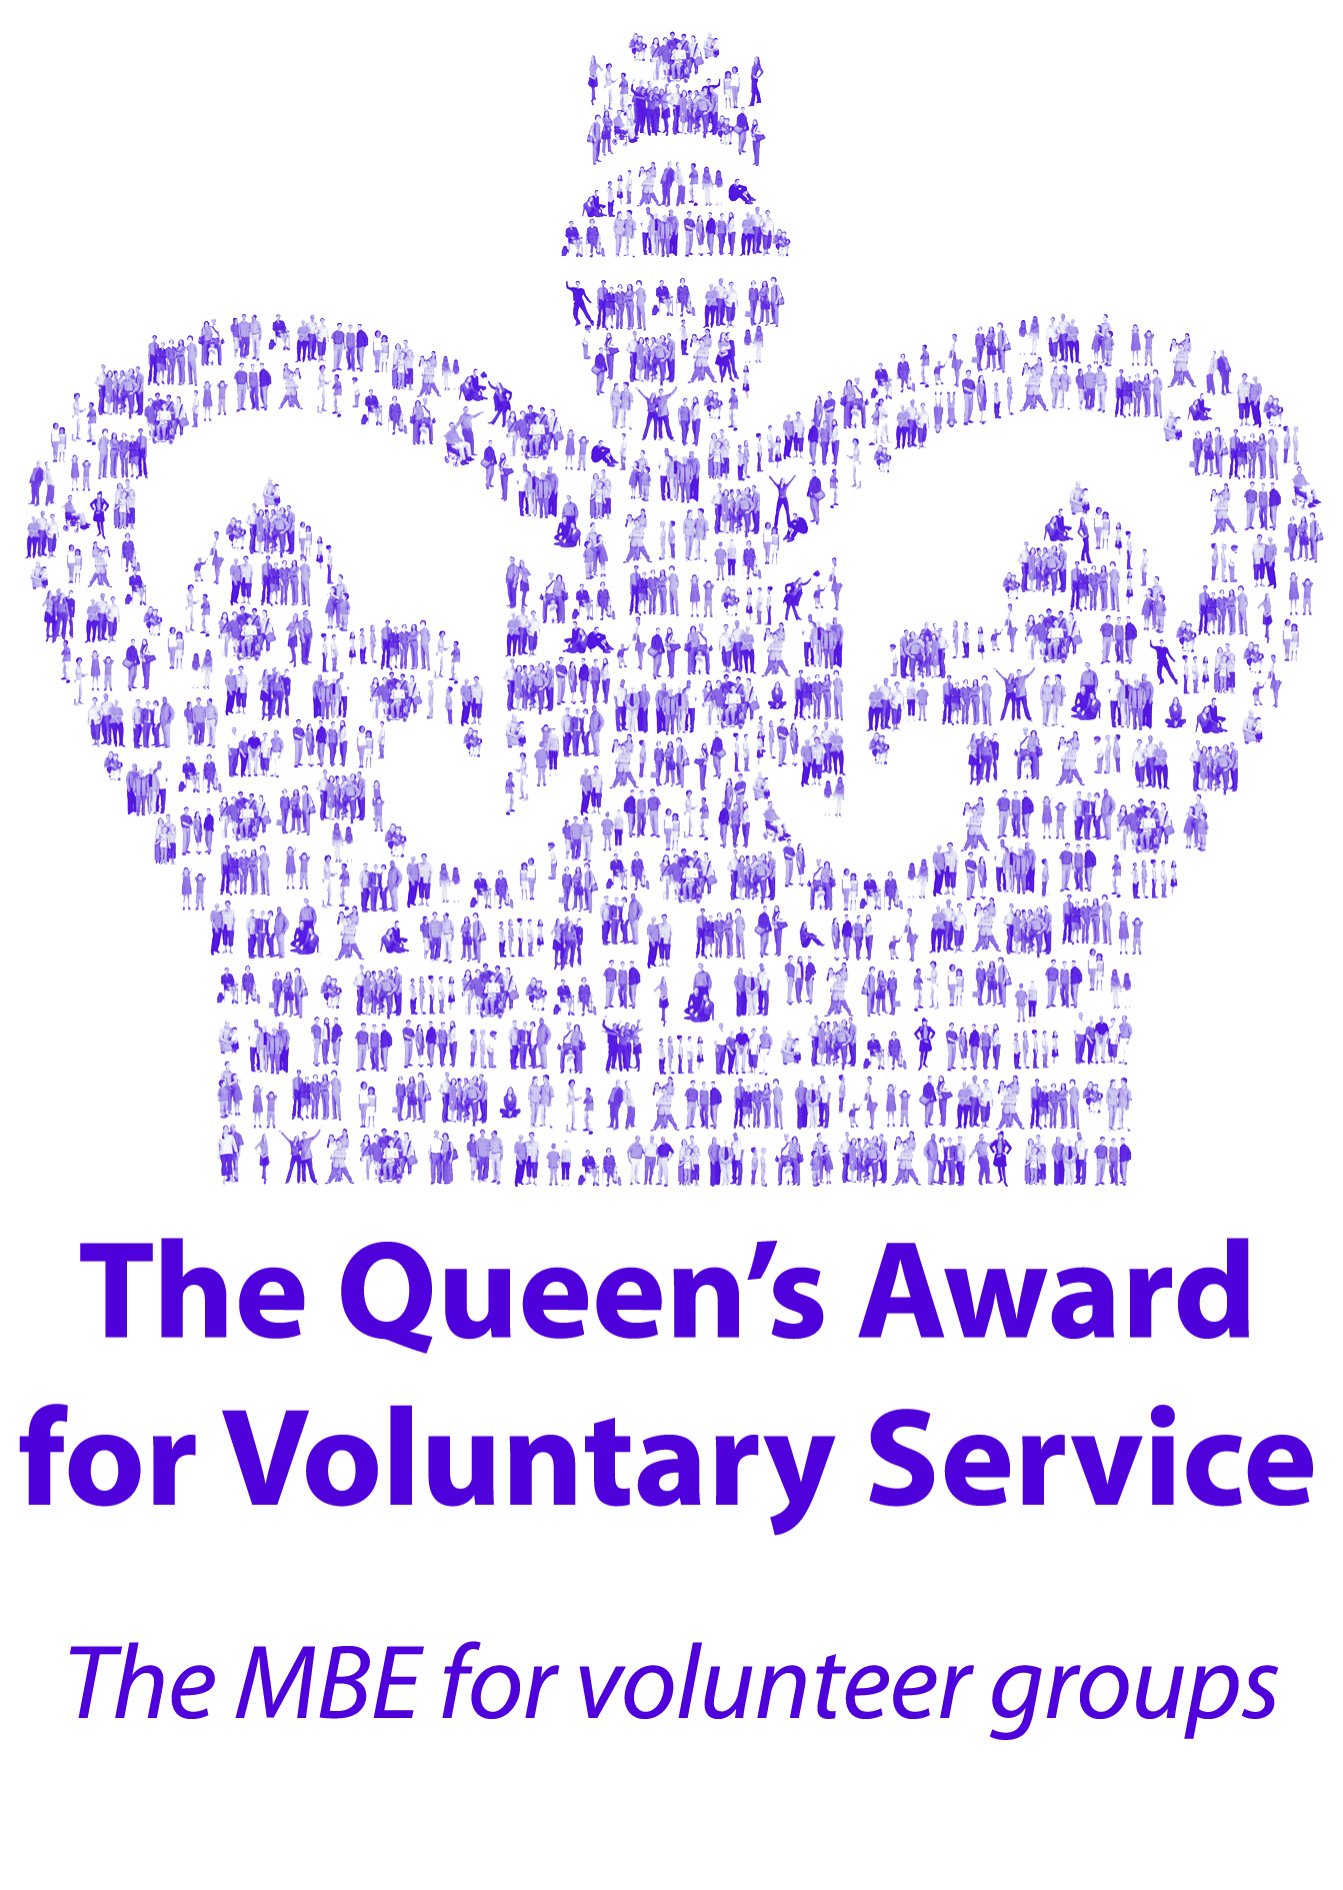 Queen's Award for Voluntary Service 2016 